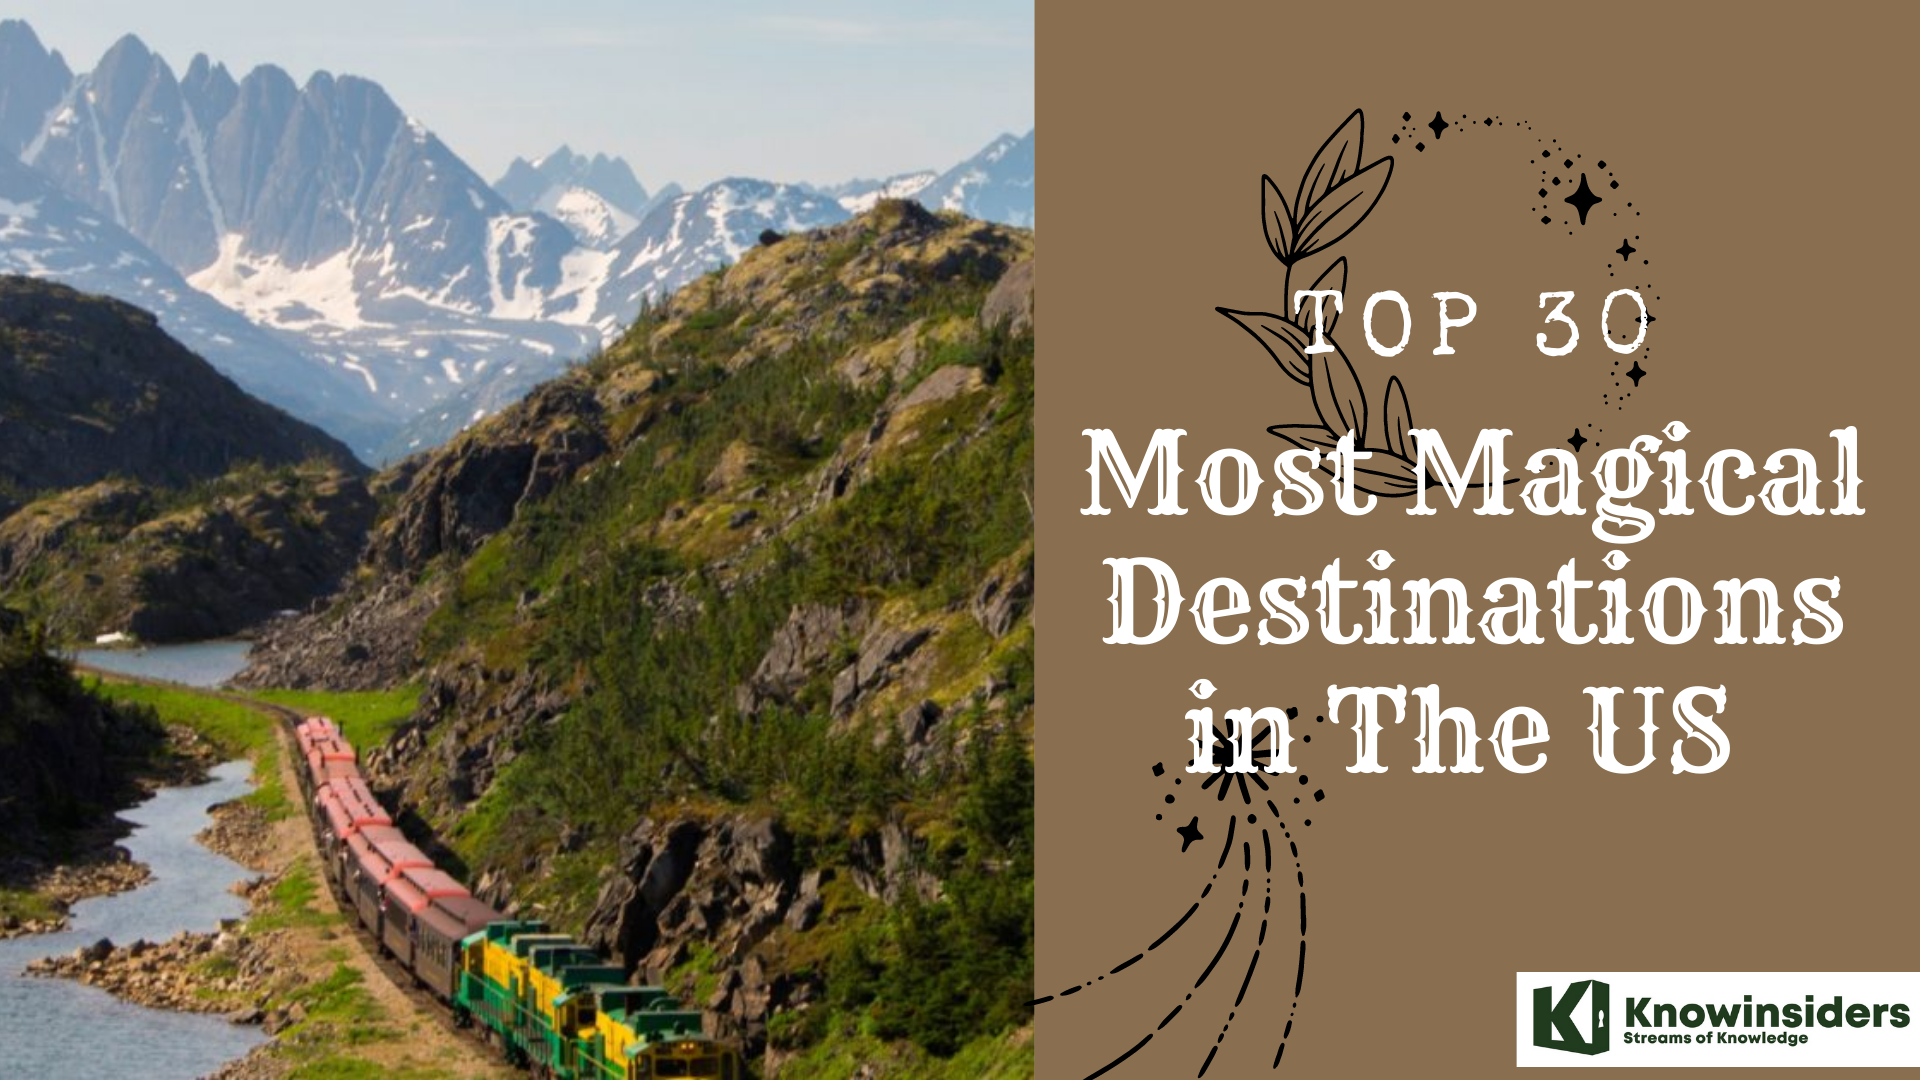 Top 30 most magical destinations in the US 